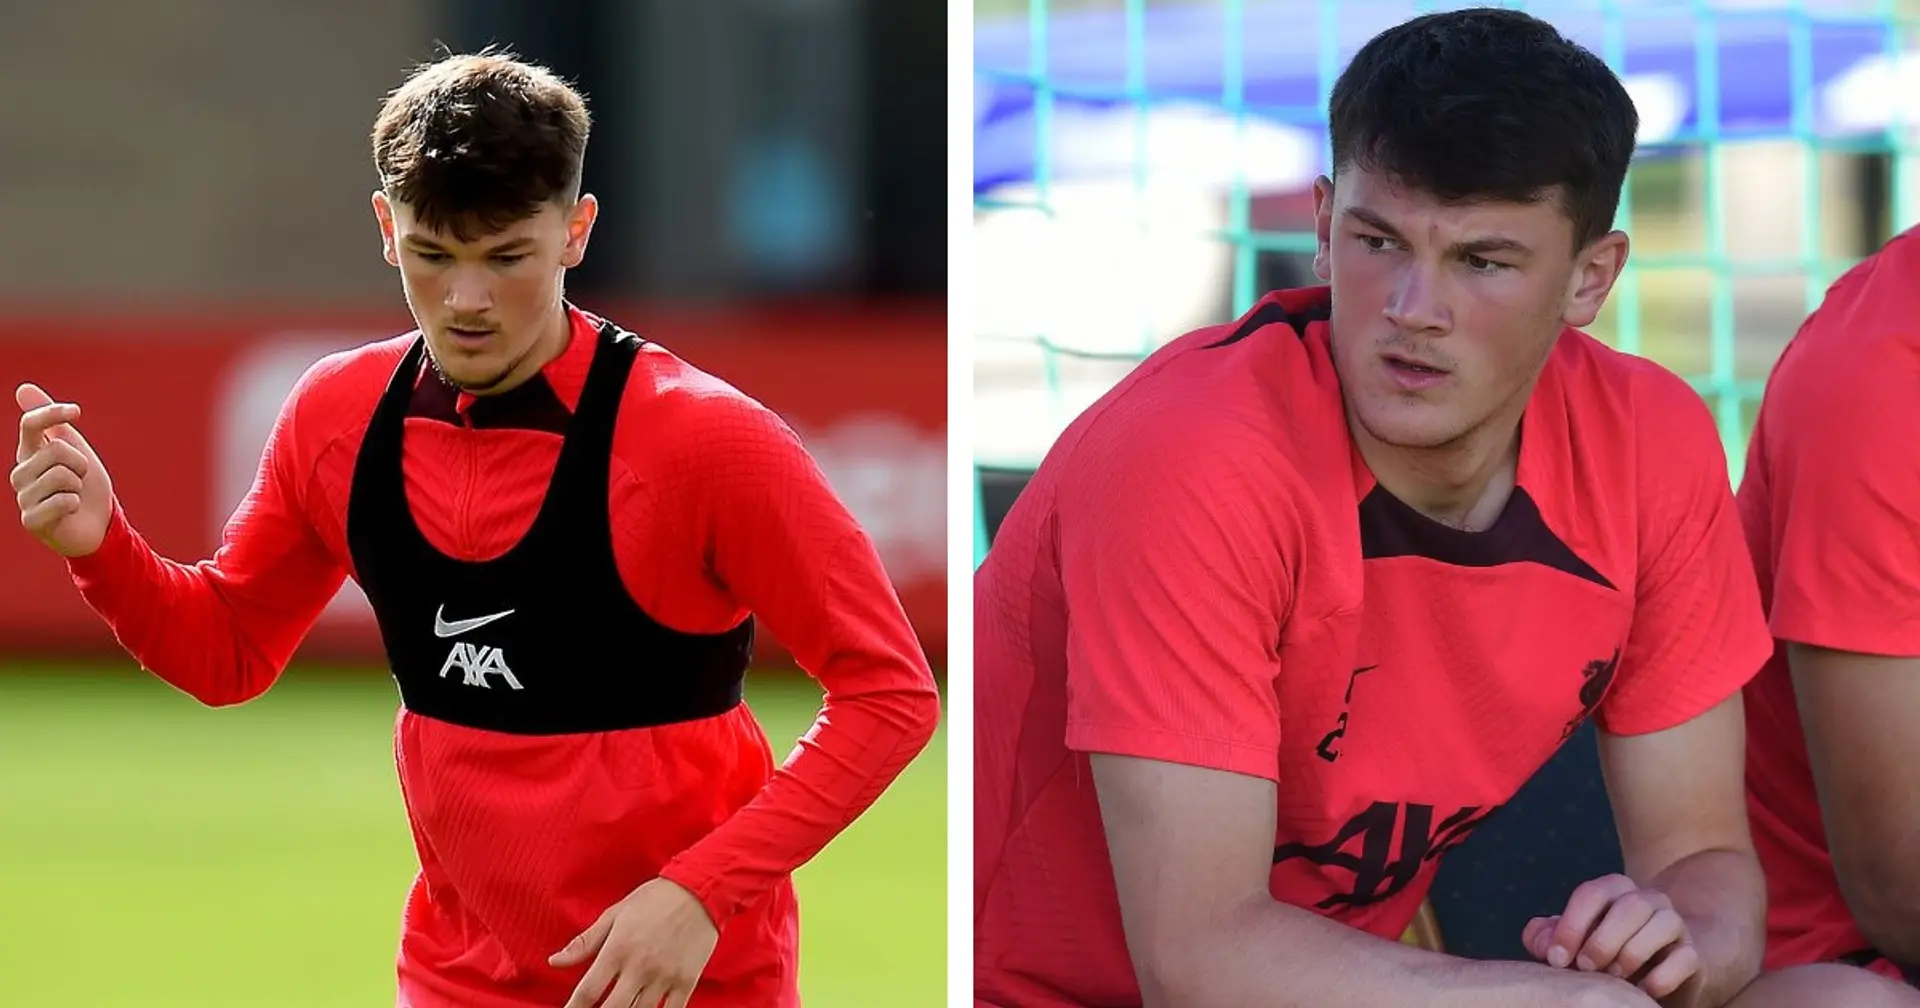 'It was frustrating, I had a stress fracture in my back': Ramsay on being injured early into Liverpool career